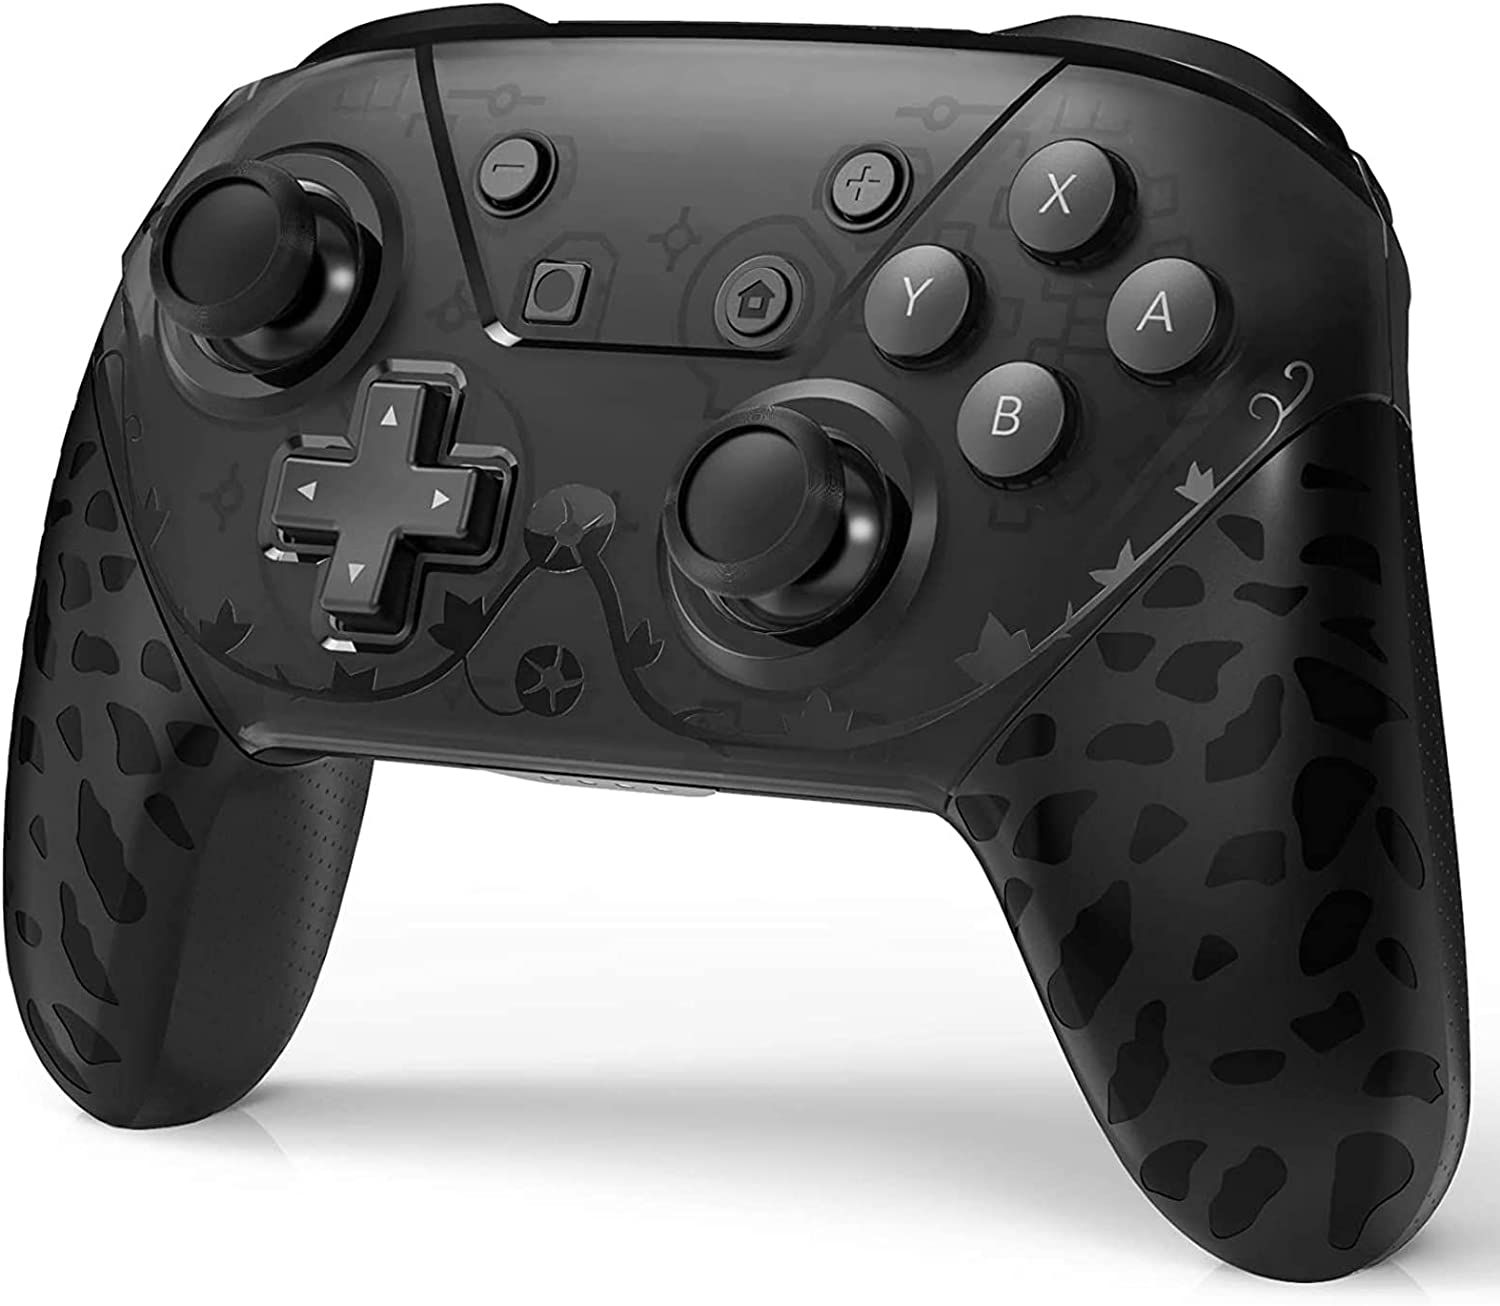 console game controller hub discounts sales january